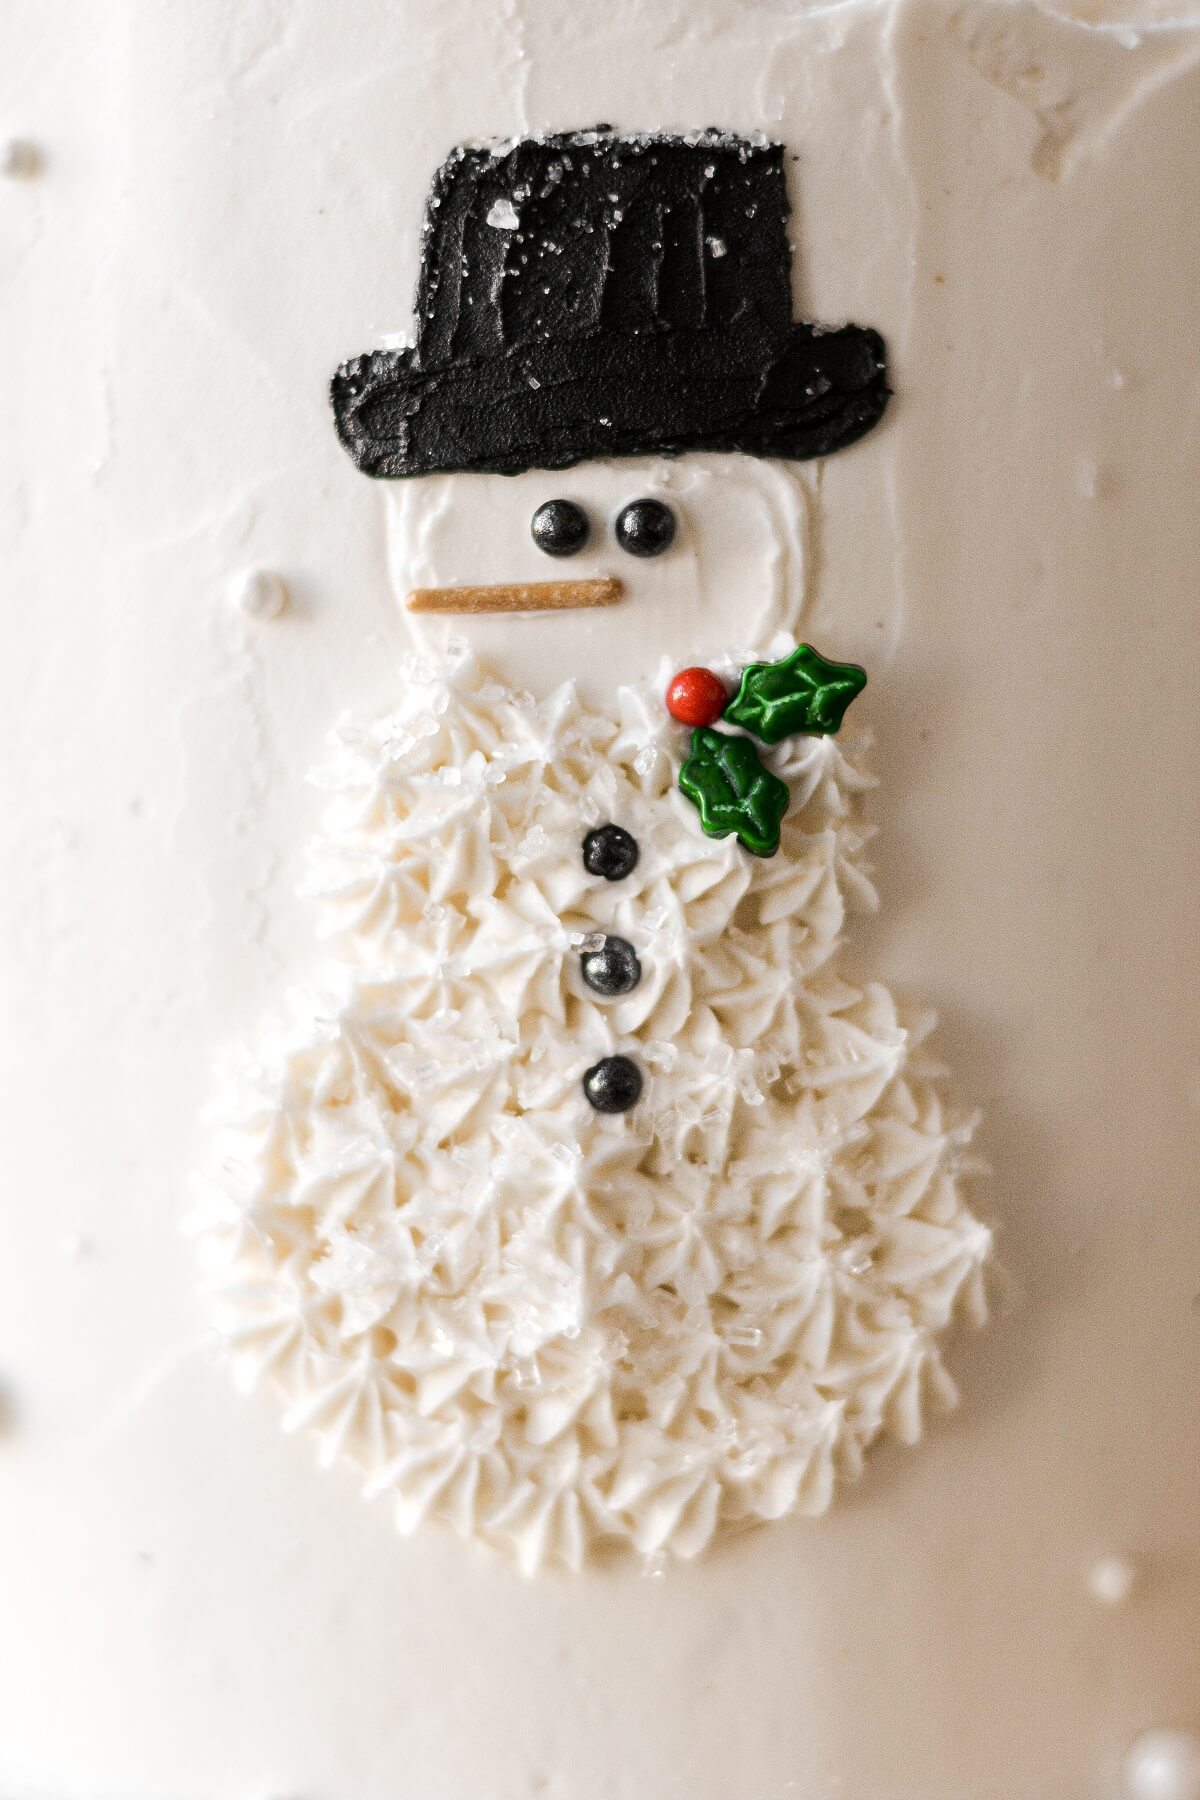 A buttercream snowman design on the side of a layer cake.